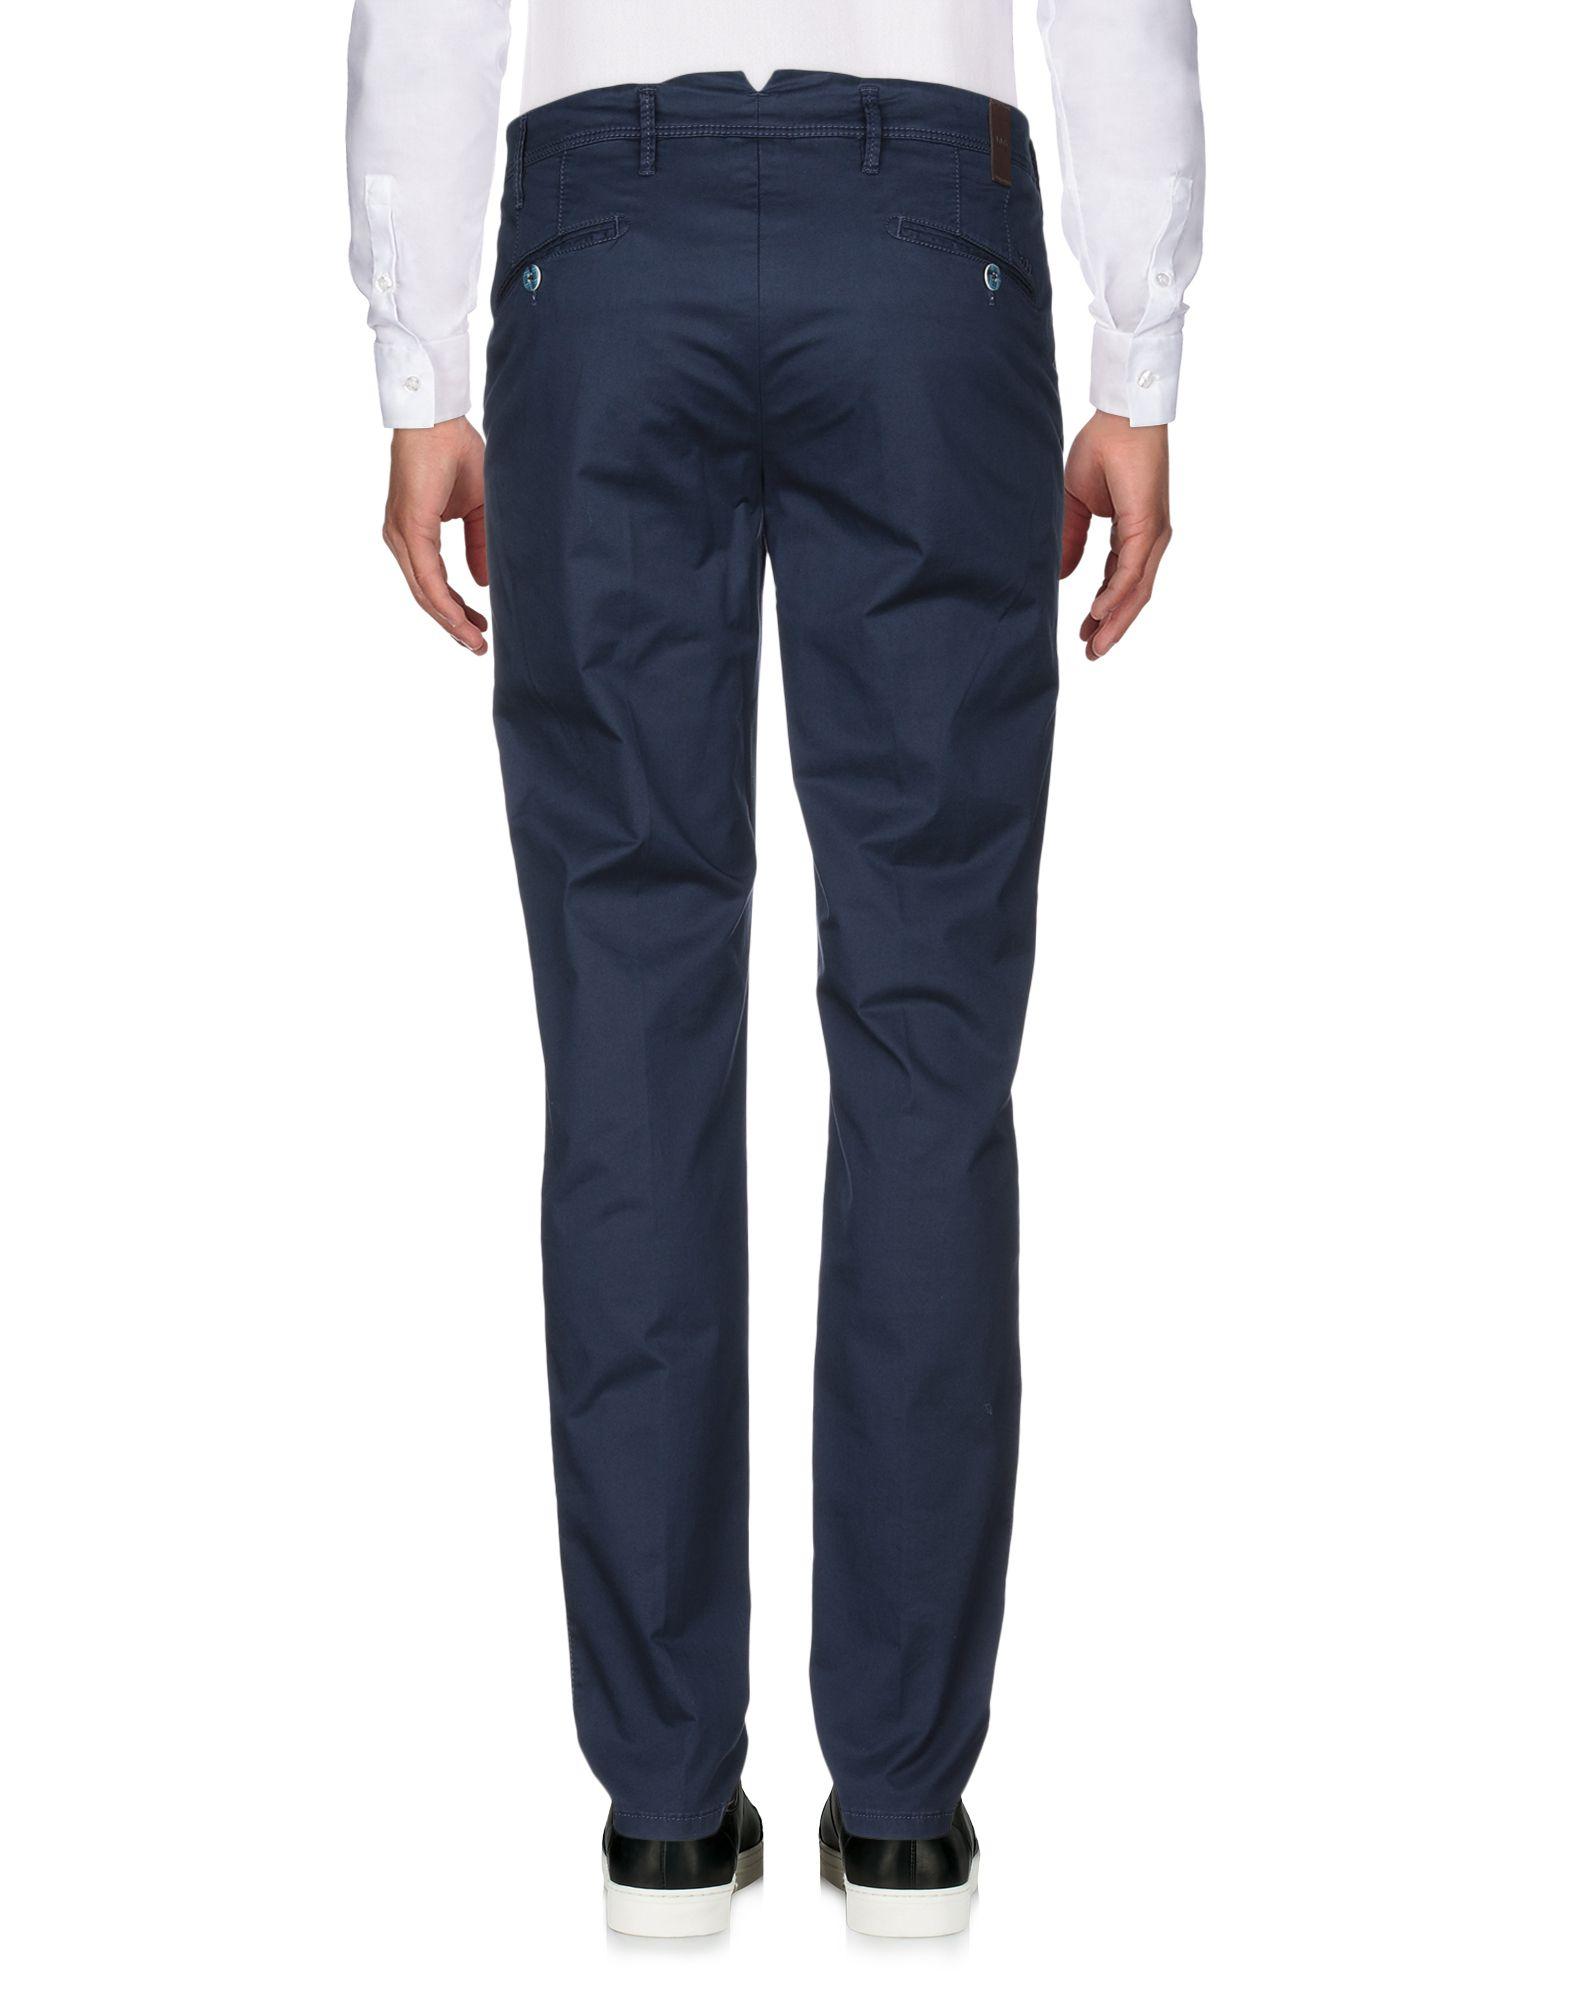 MMX Leather Casual Pants in Dark Blue (Blue) for Men - Lyst